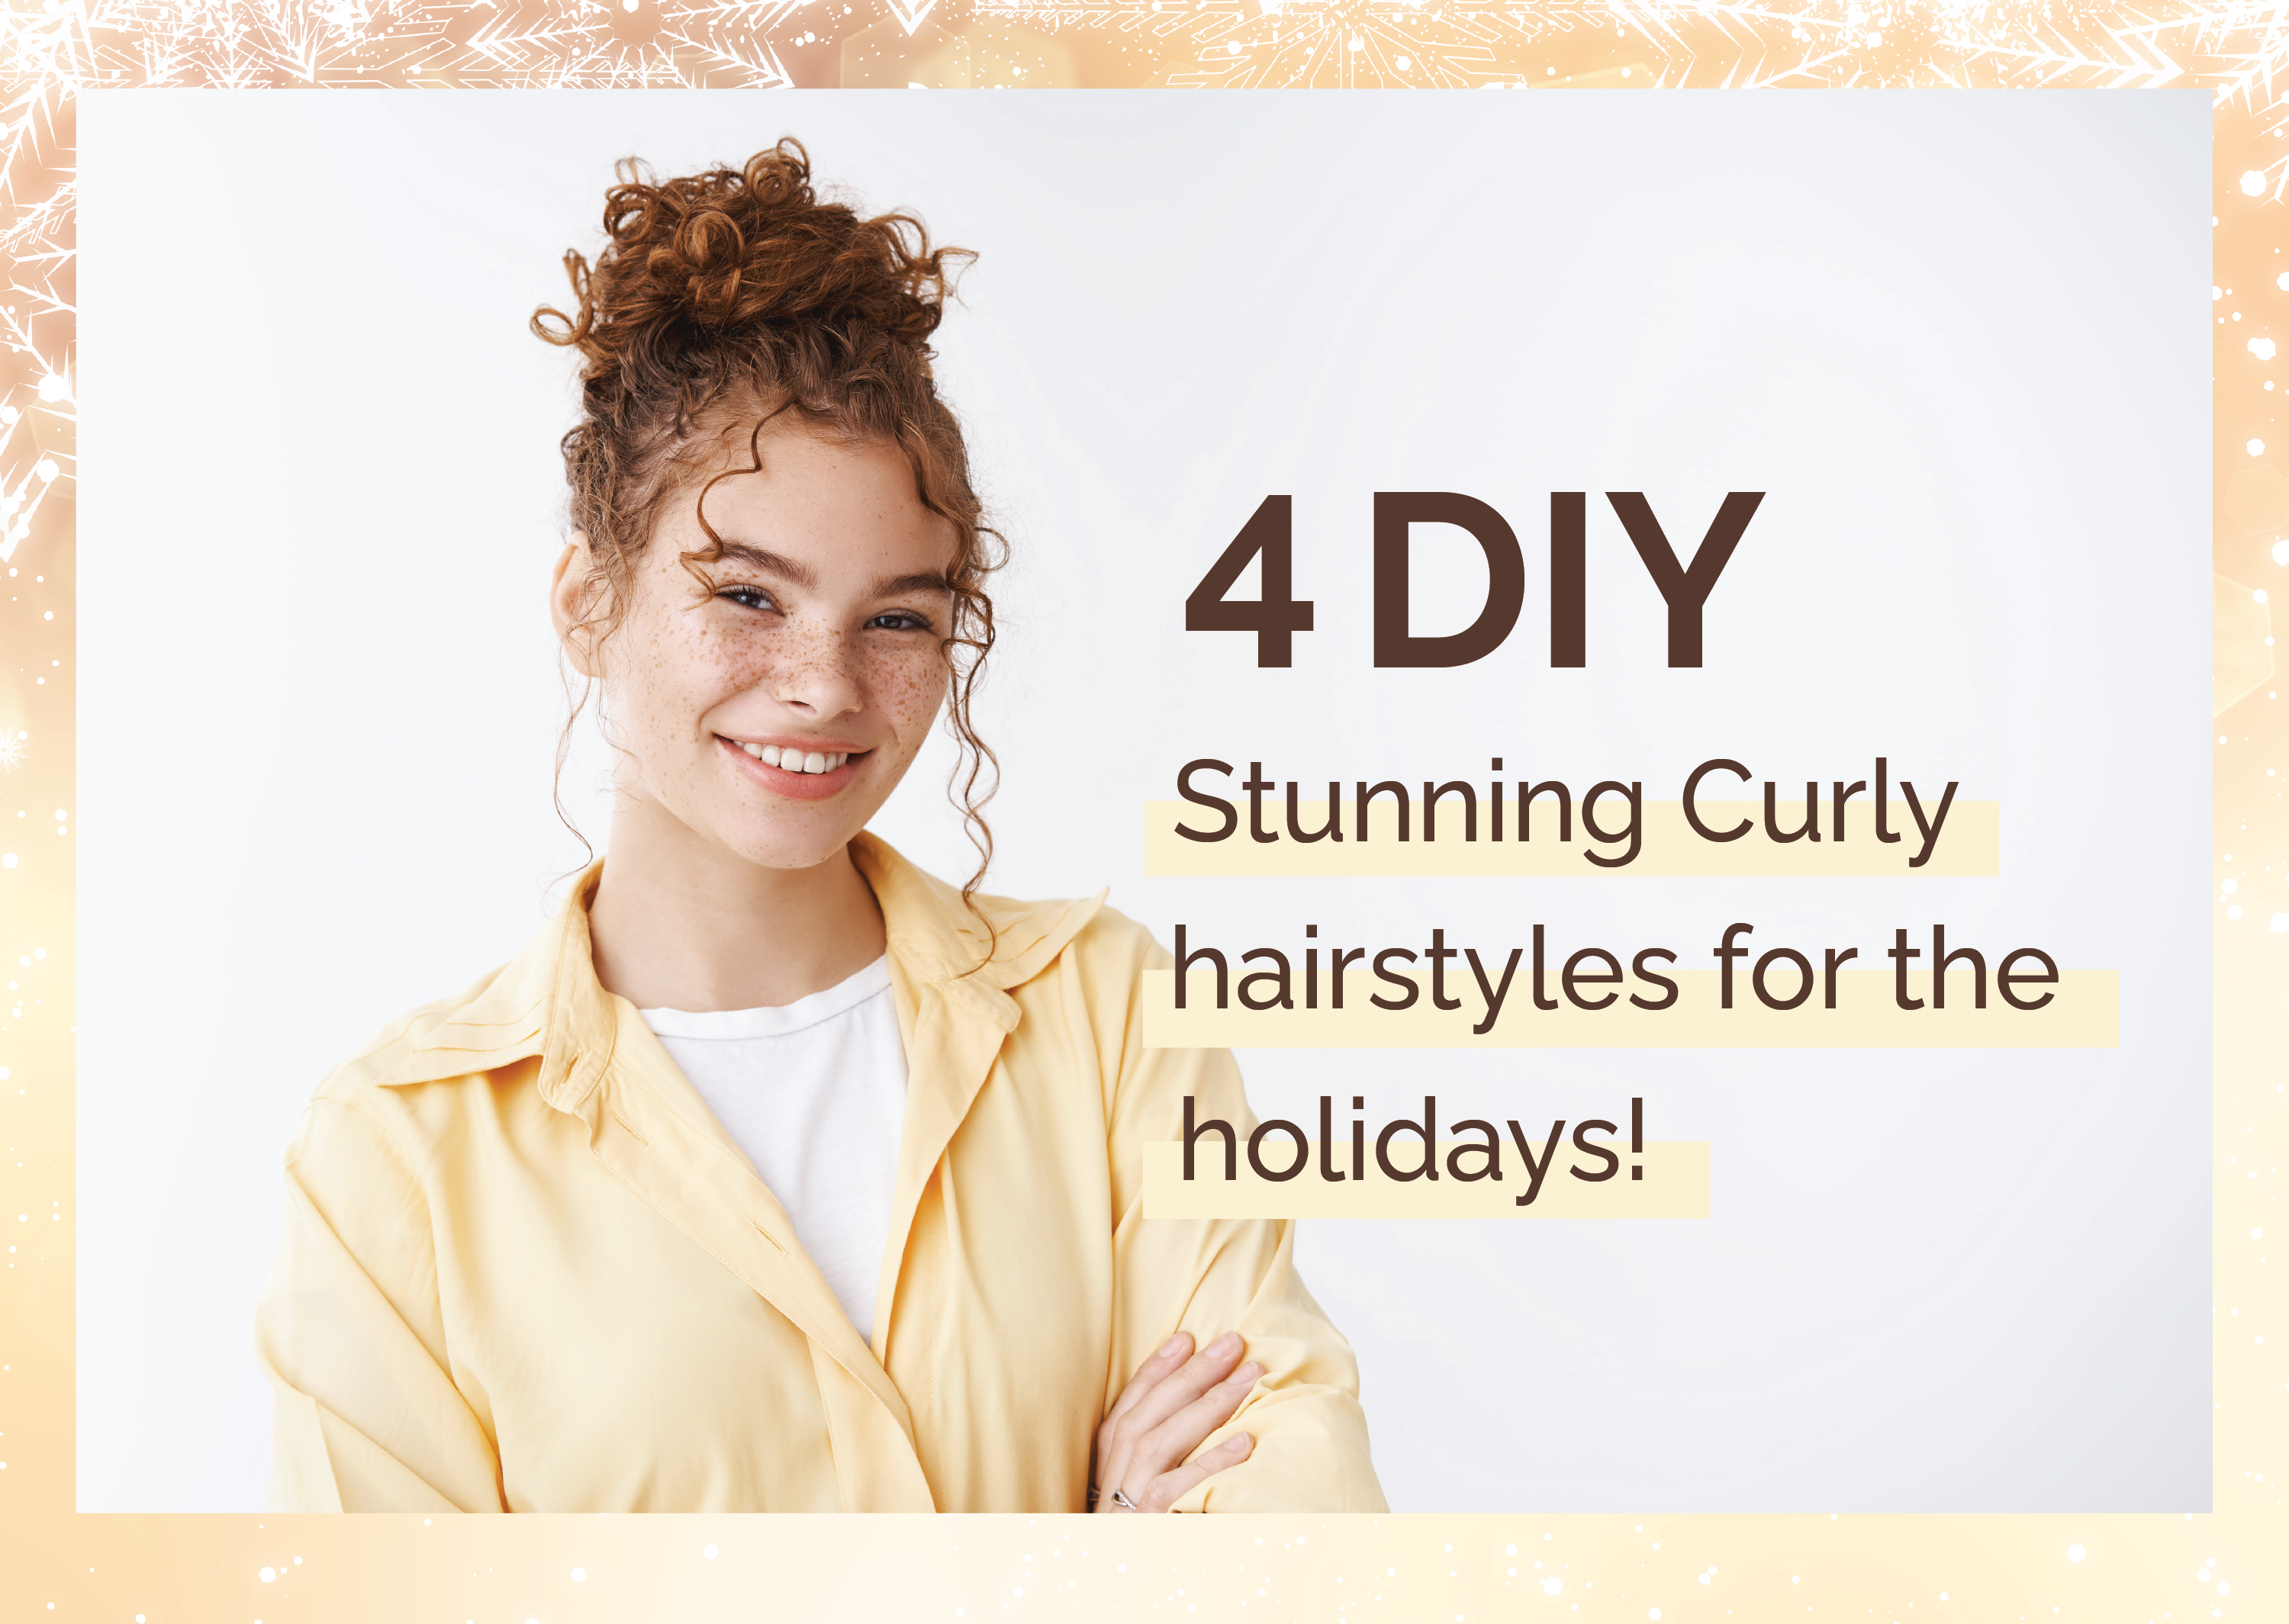 4 DIY stunning curly hairstyles for the holidays